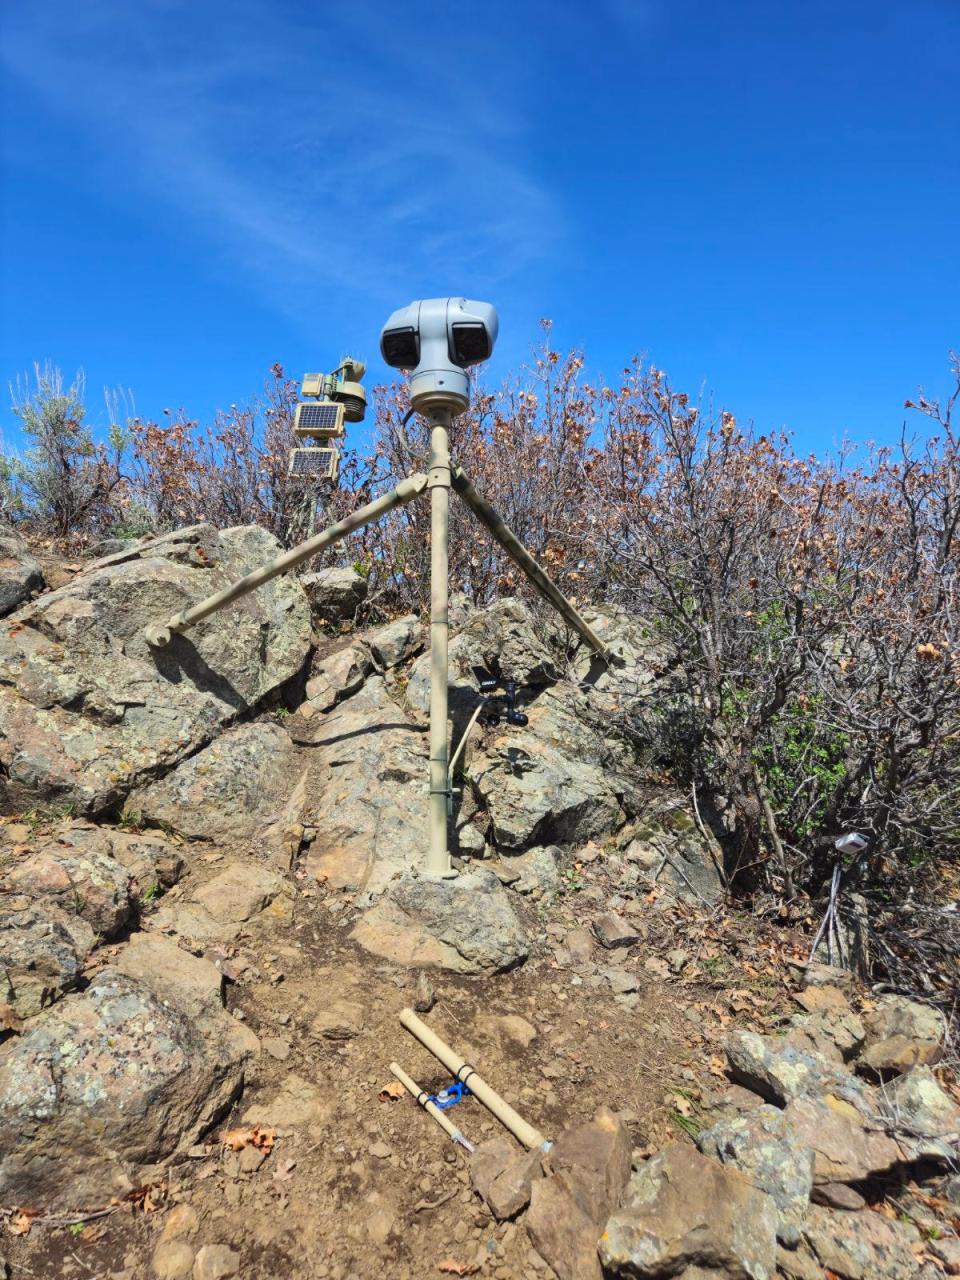 The RattleCam, deployed by Cal Poly researchers in northern Colorado, described as a "mega-den," relays footage from a den with as many as 2,000 rattlesnakes in the greater den complex.